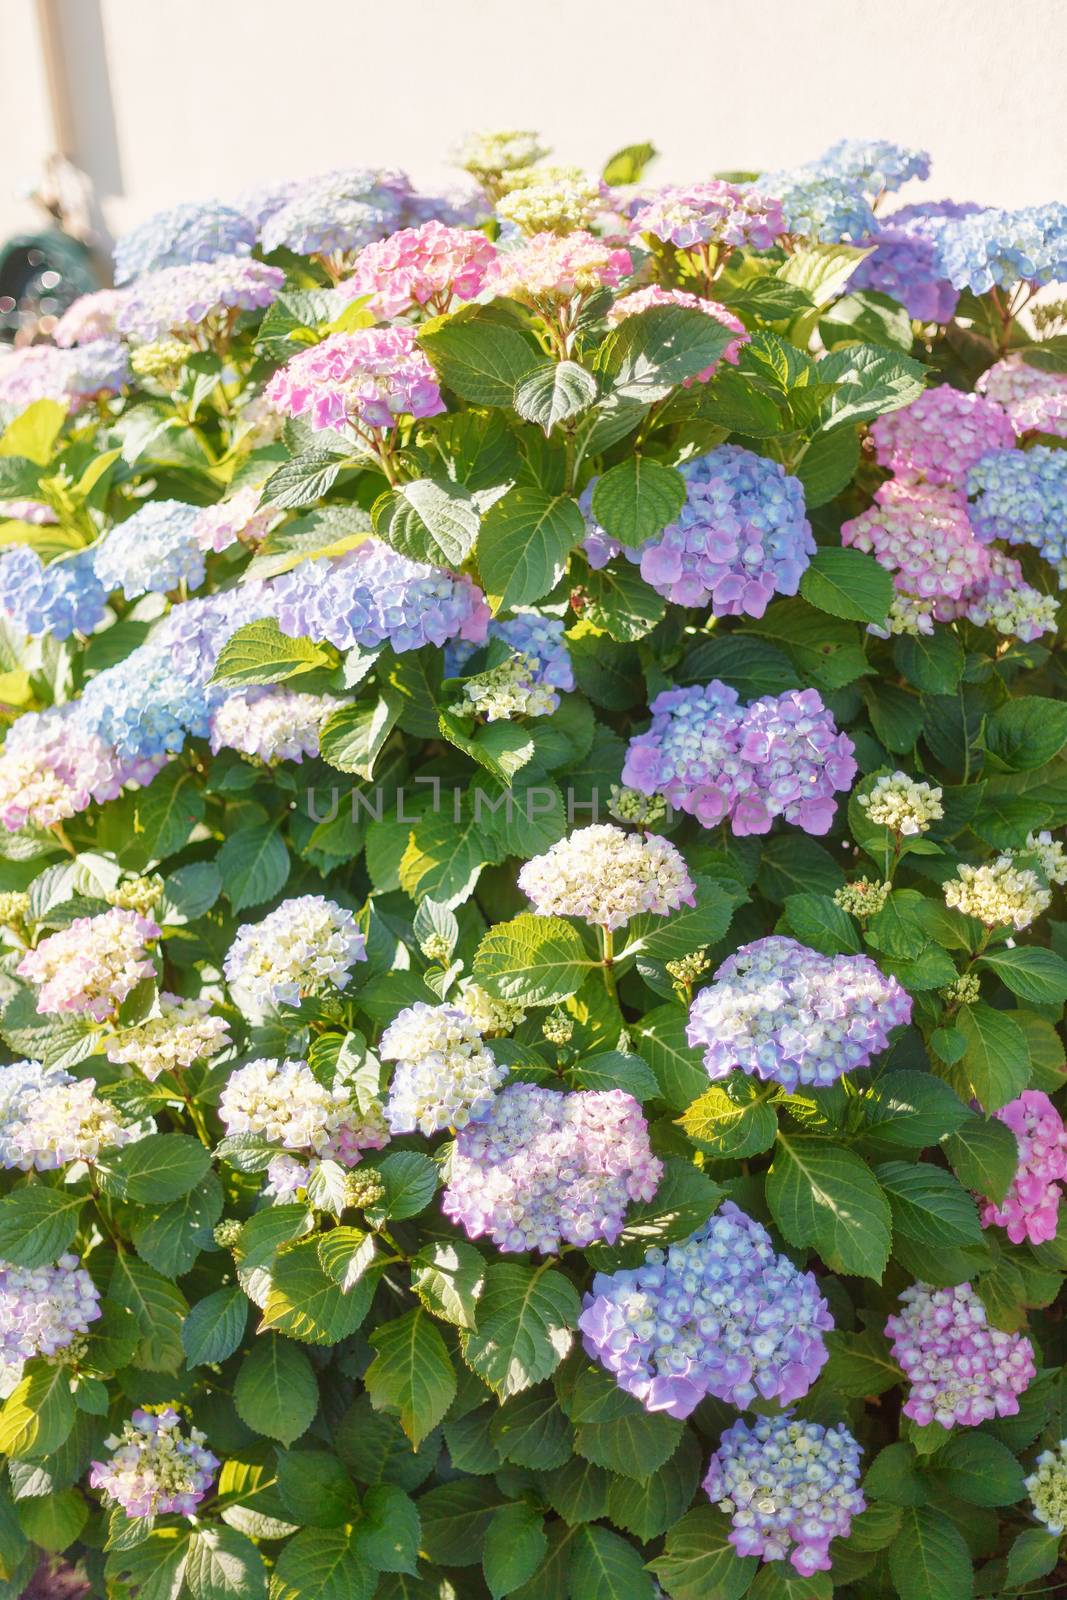 Flowering hydrangea bush covered in assorted pink and blue clusters of flowers in sunshine growing in a garden, close up view